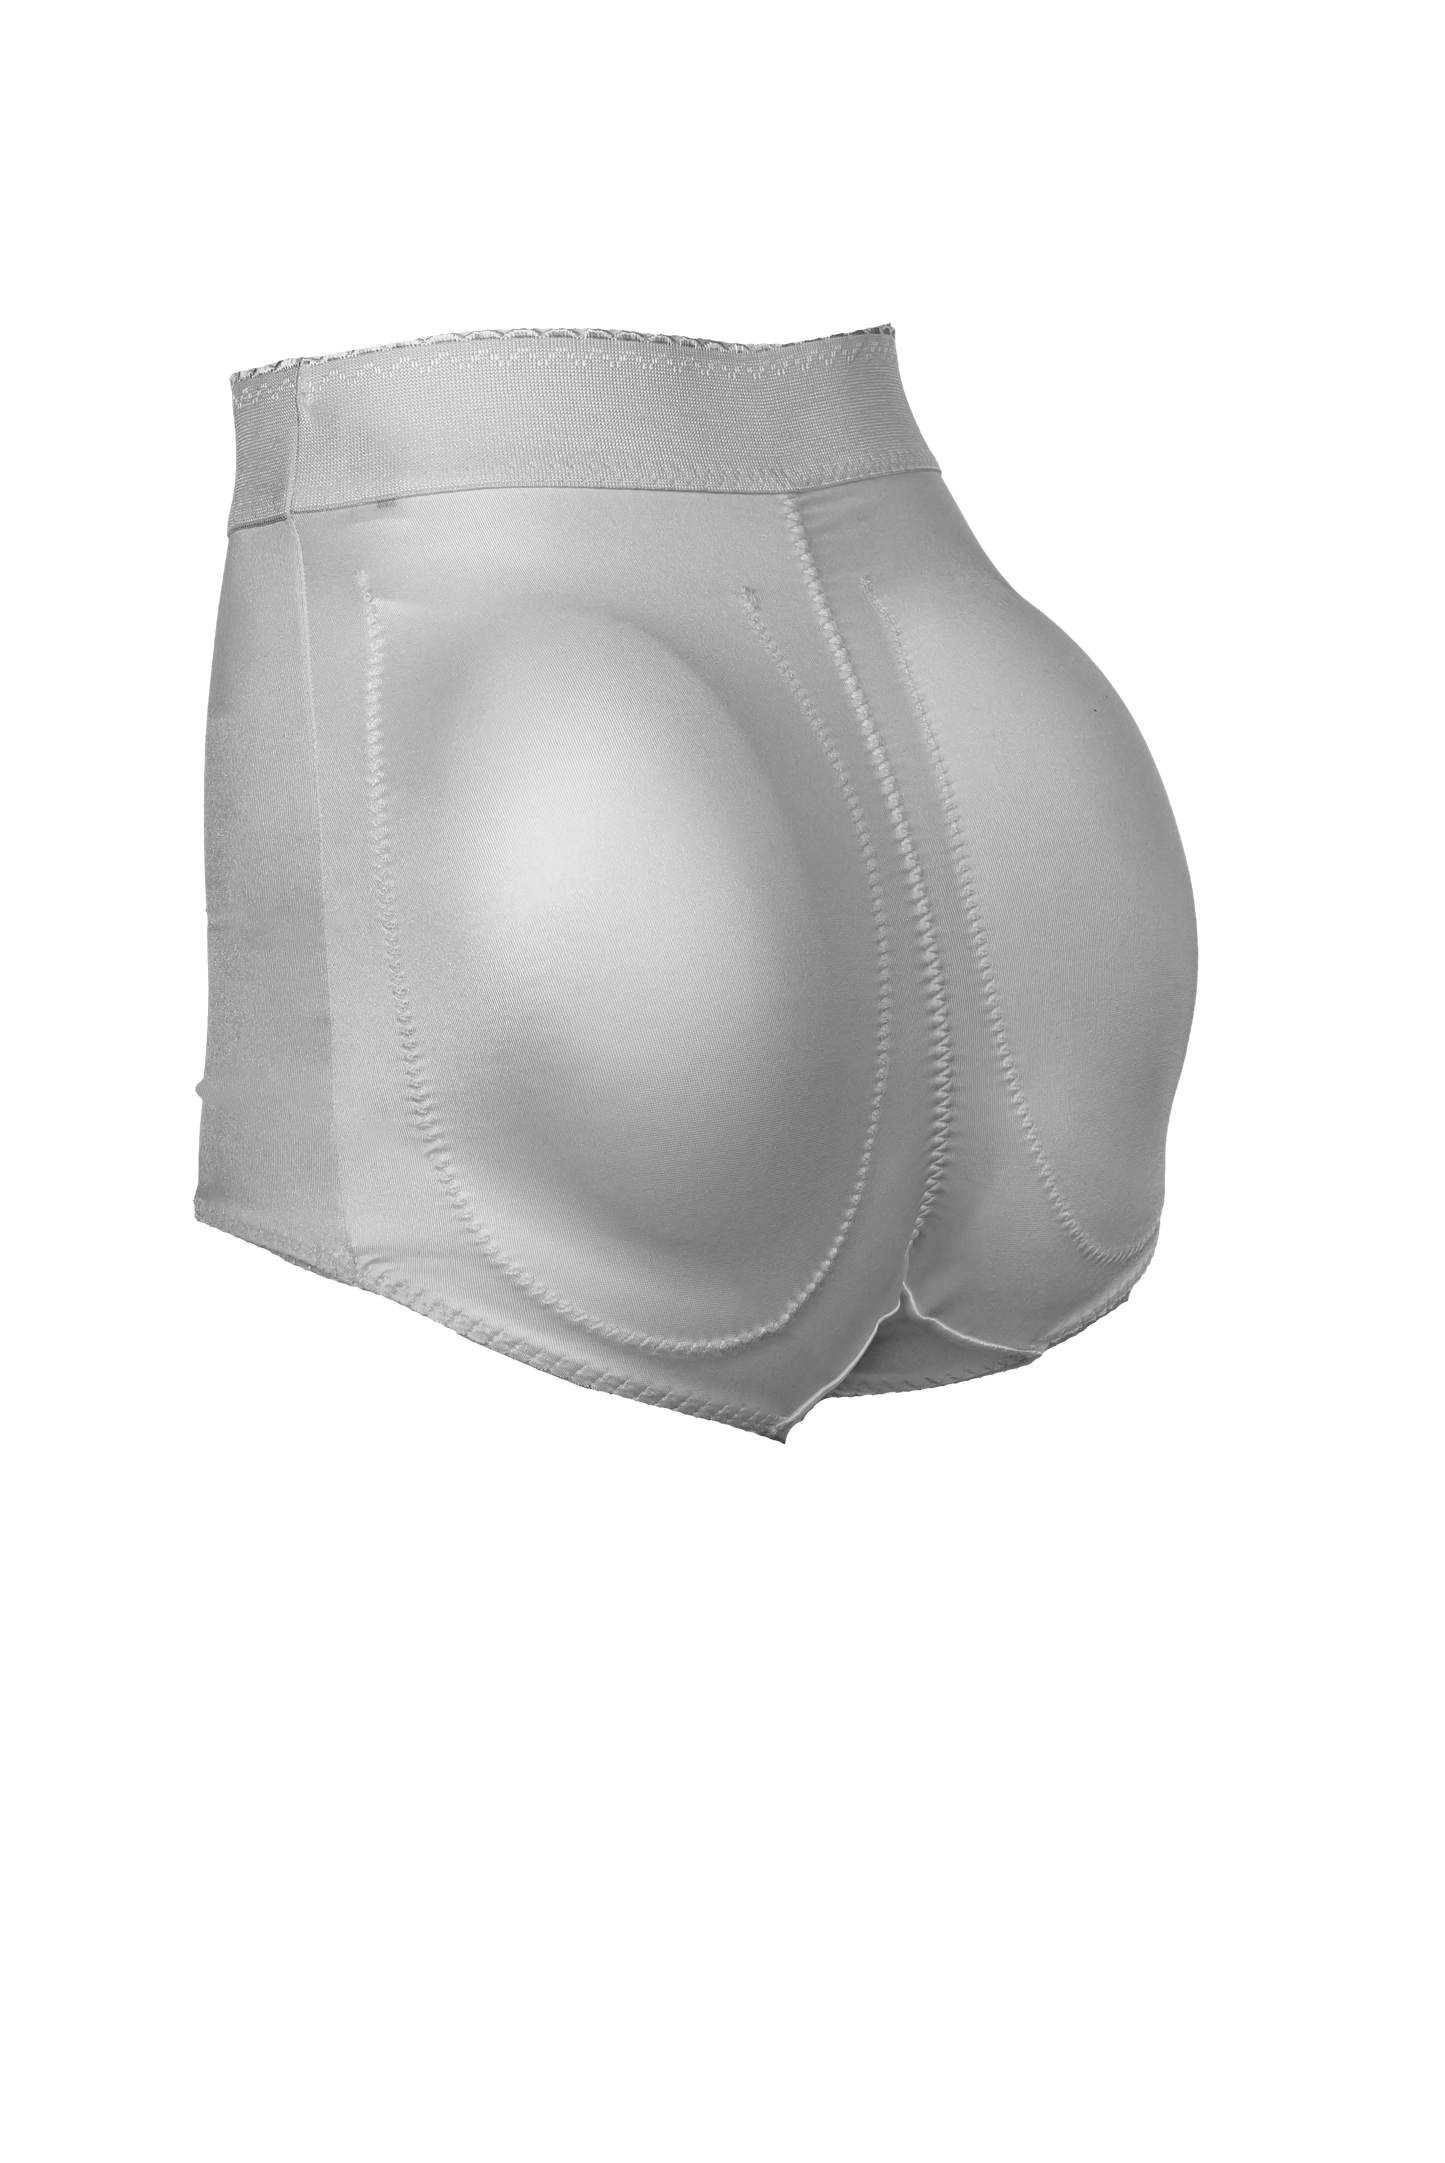 High Waist Control Padded Shaper Panty With Removable Inserts And Padding  For Women Big Seamless Butt Enhancer Ass Underwear Prayger CX200624 From  Caliu123, $14.01